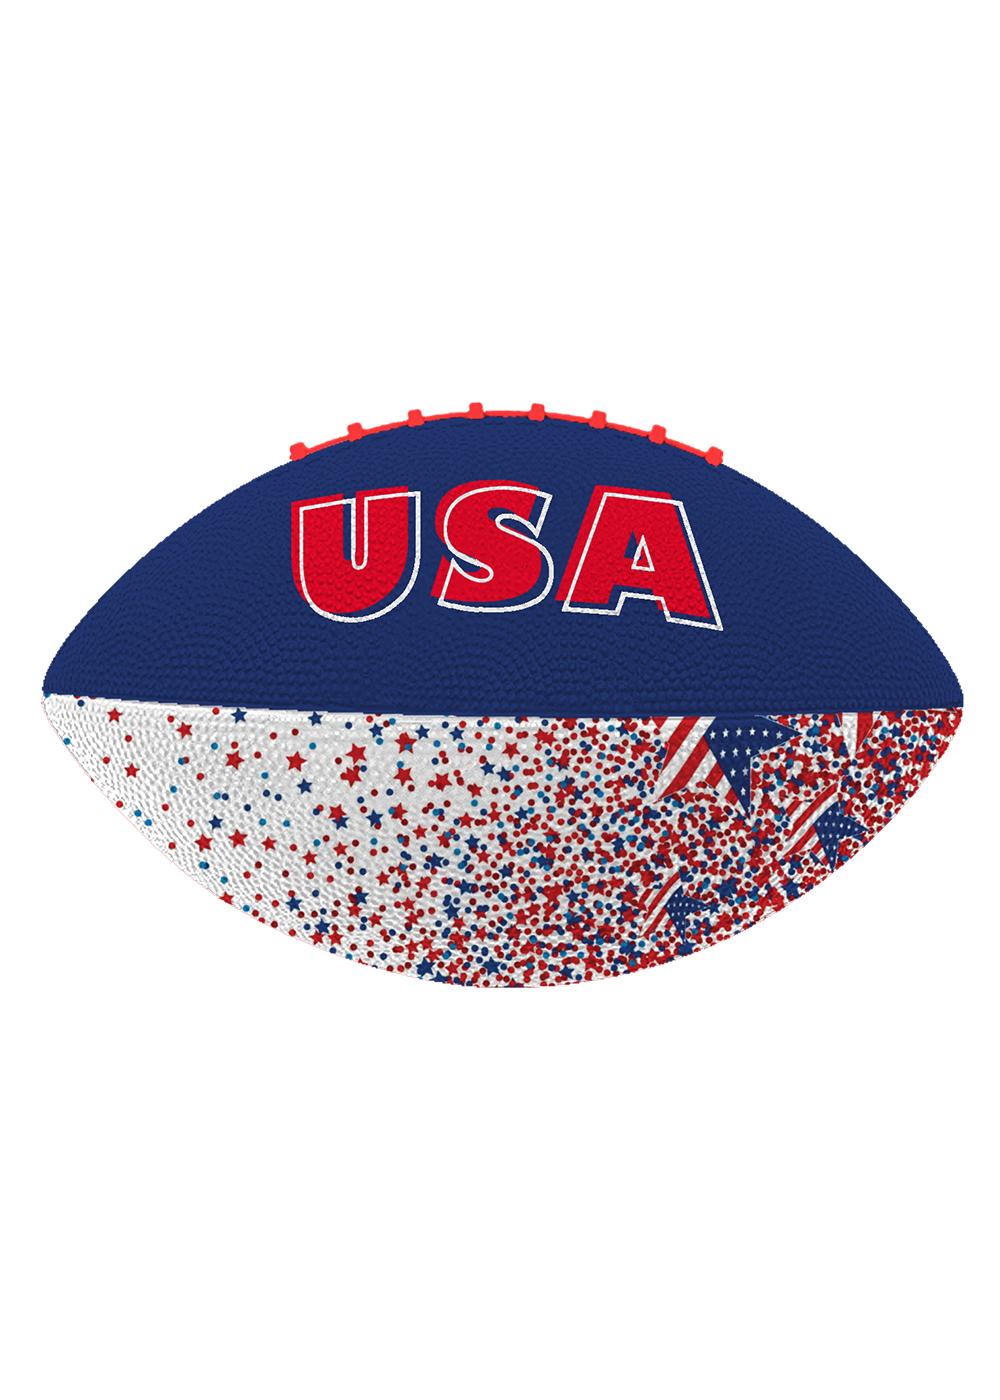 BADEN USA Official Size Rubber Football; image 3 of 3